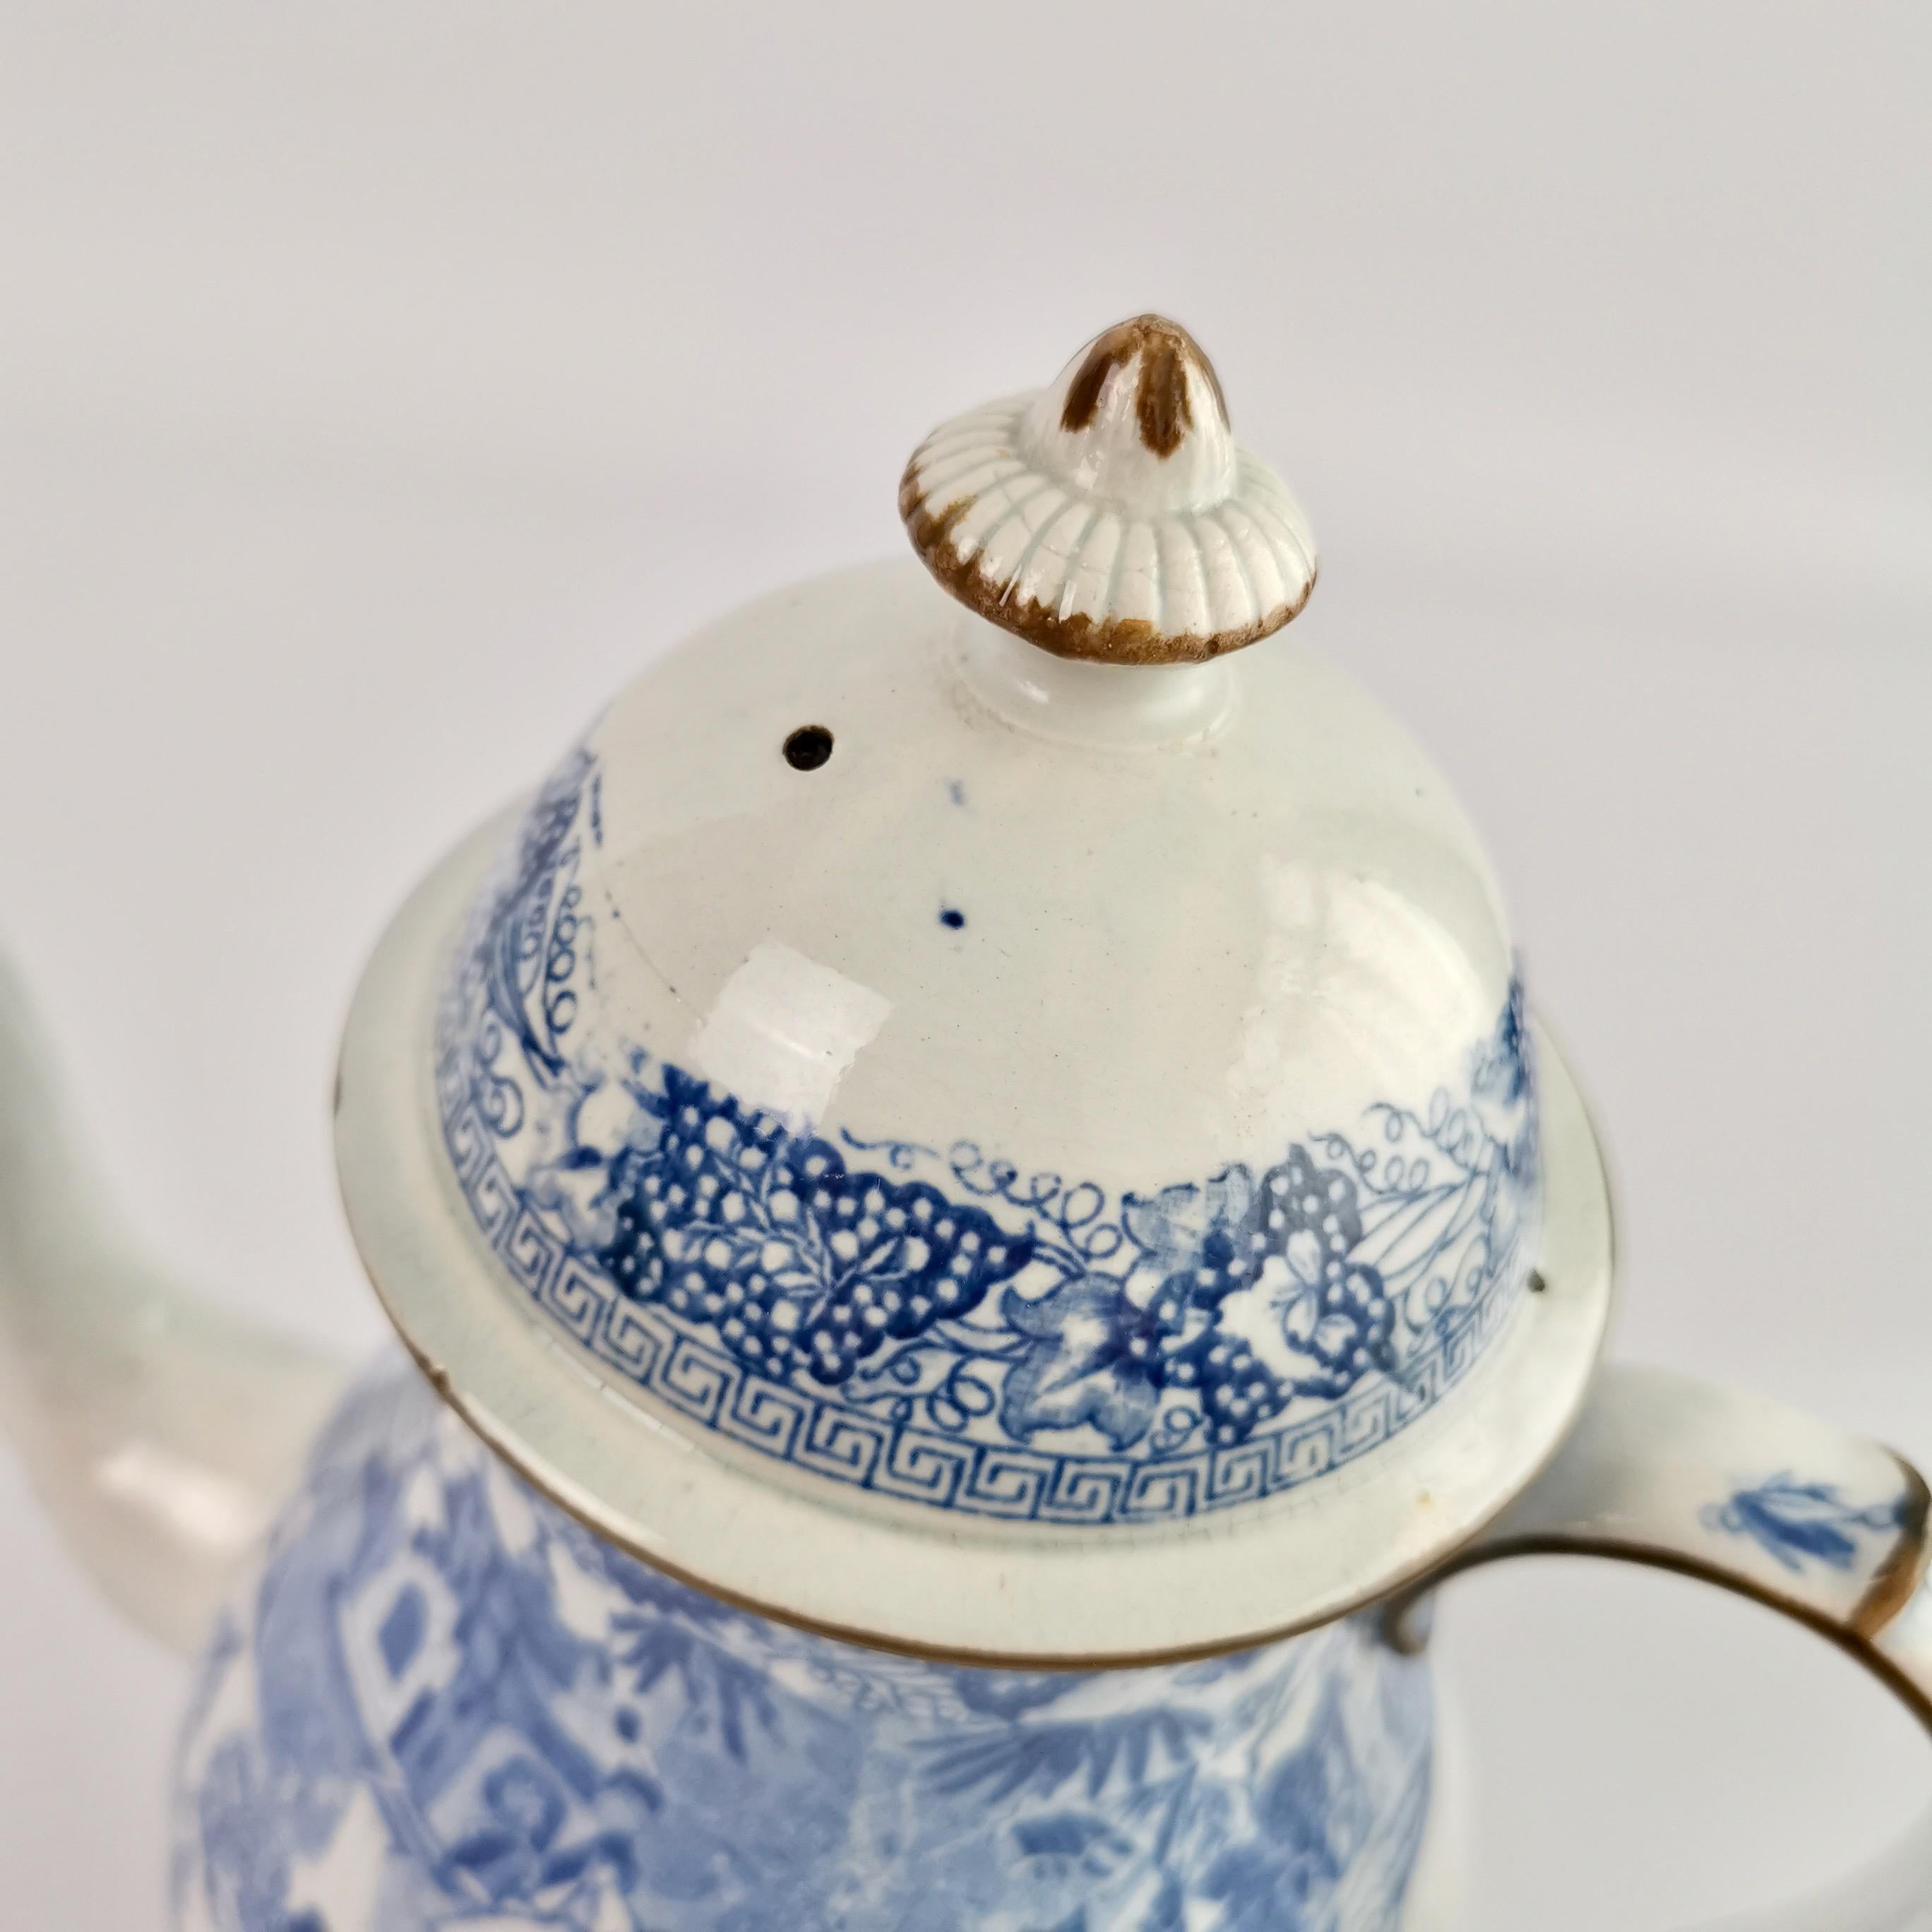 Rathbone Pearlware Coffee Pot, Pagoda Pattern Blue and White, ca 1815 5